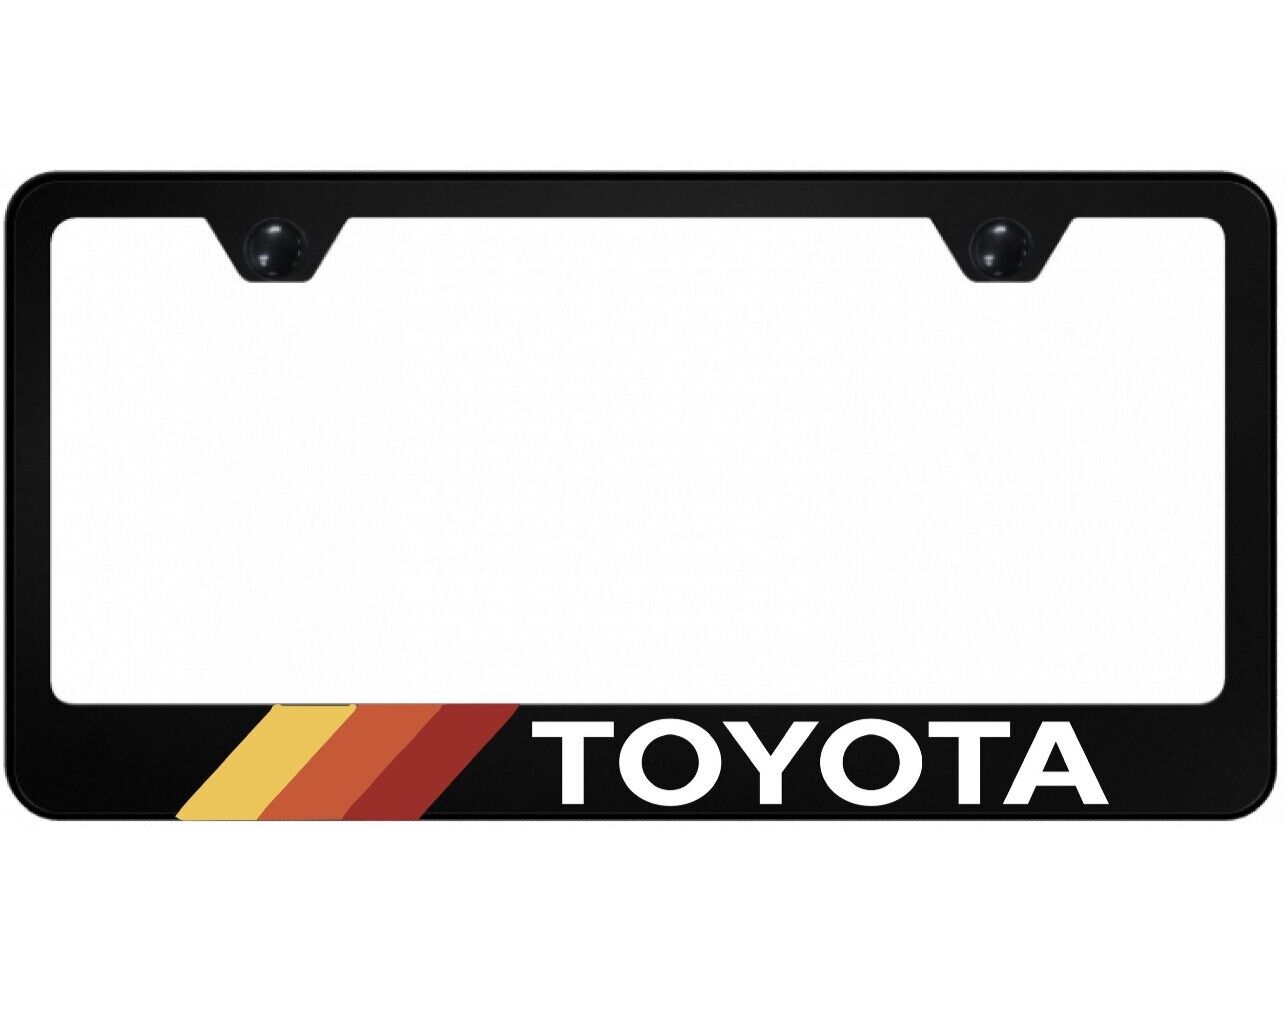 Toyota Style Heritage Classic Retro Off-road License Plate Frame